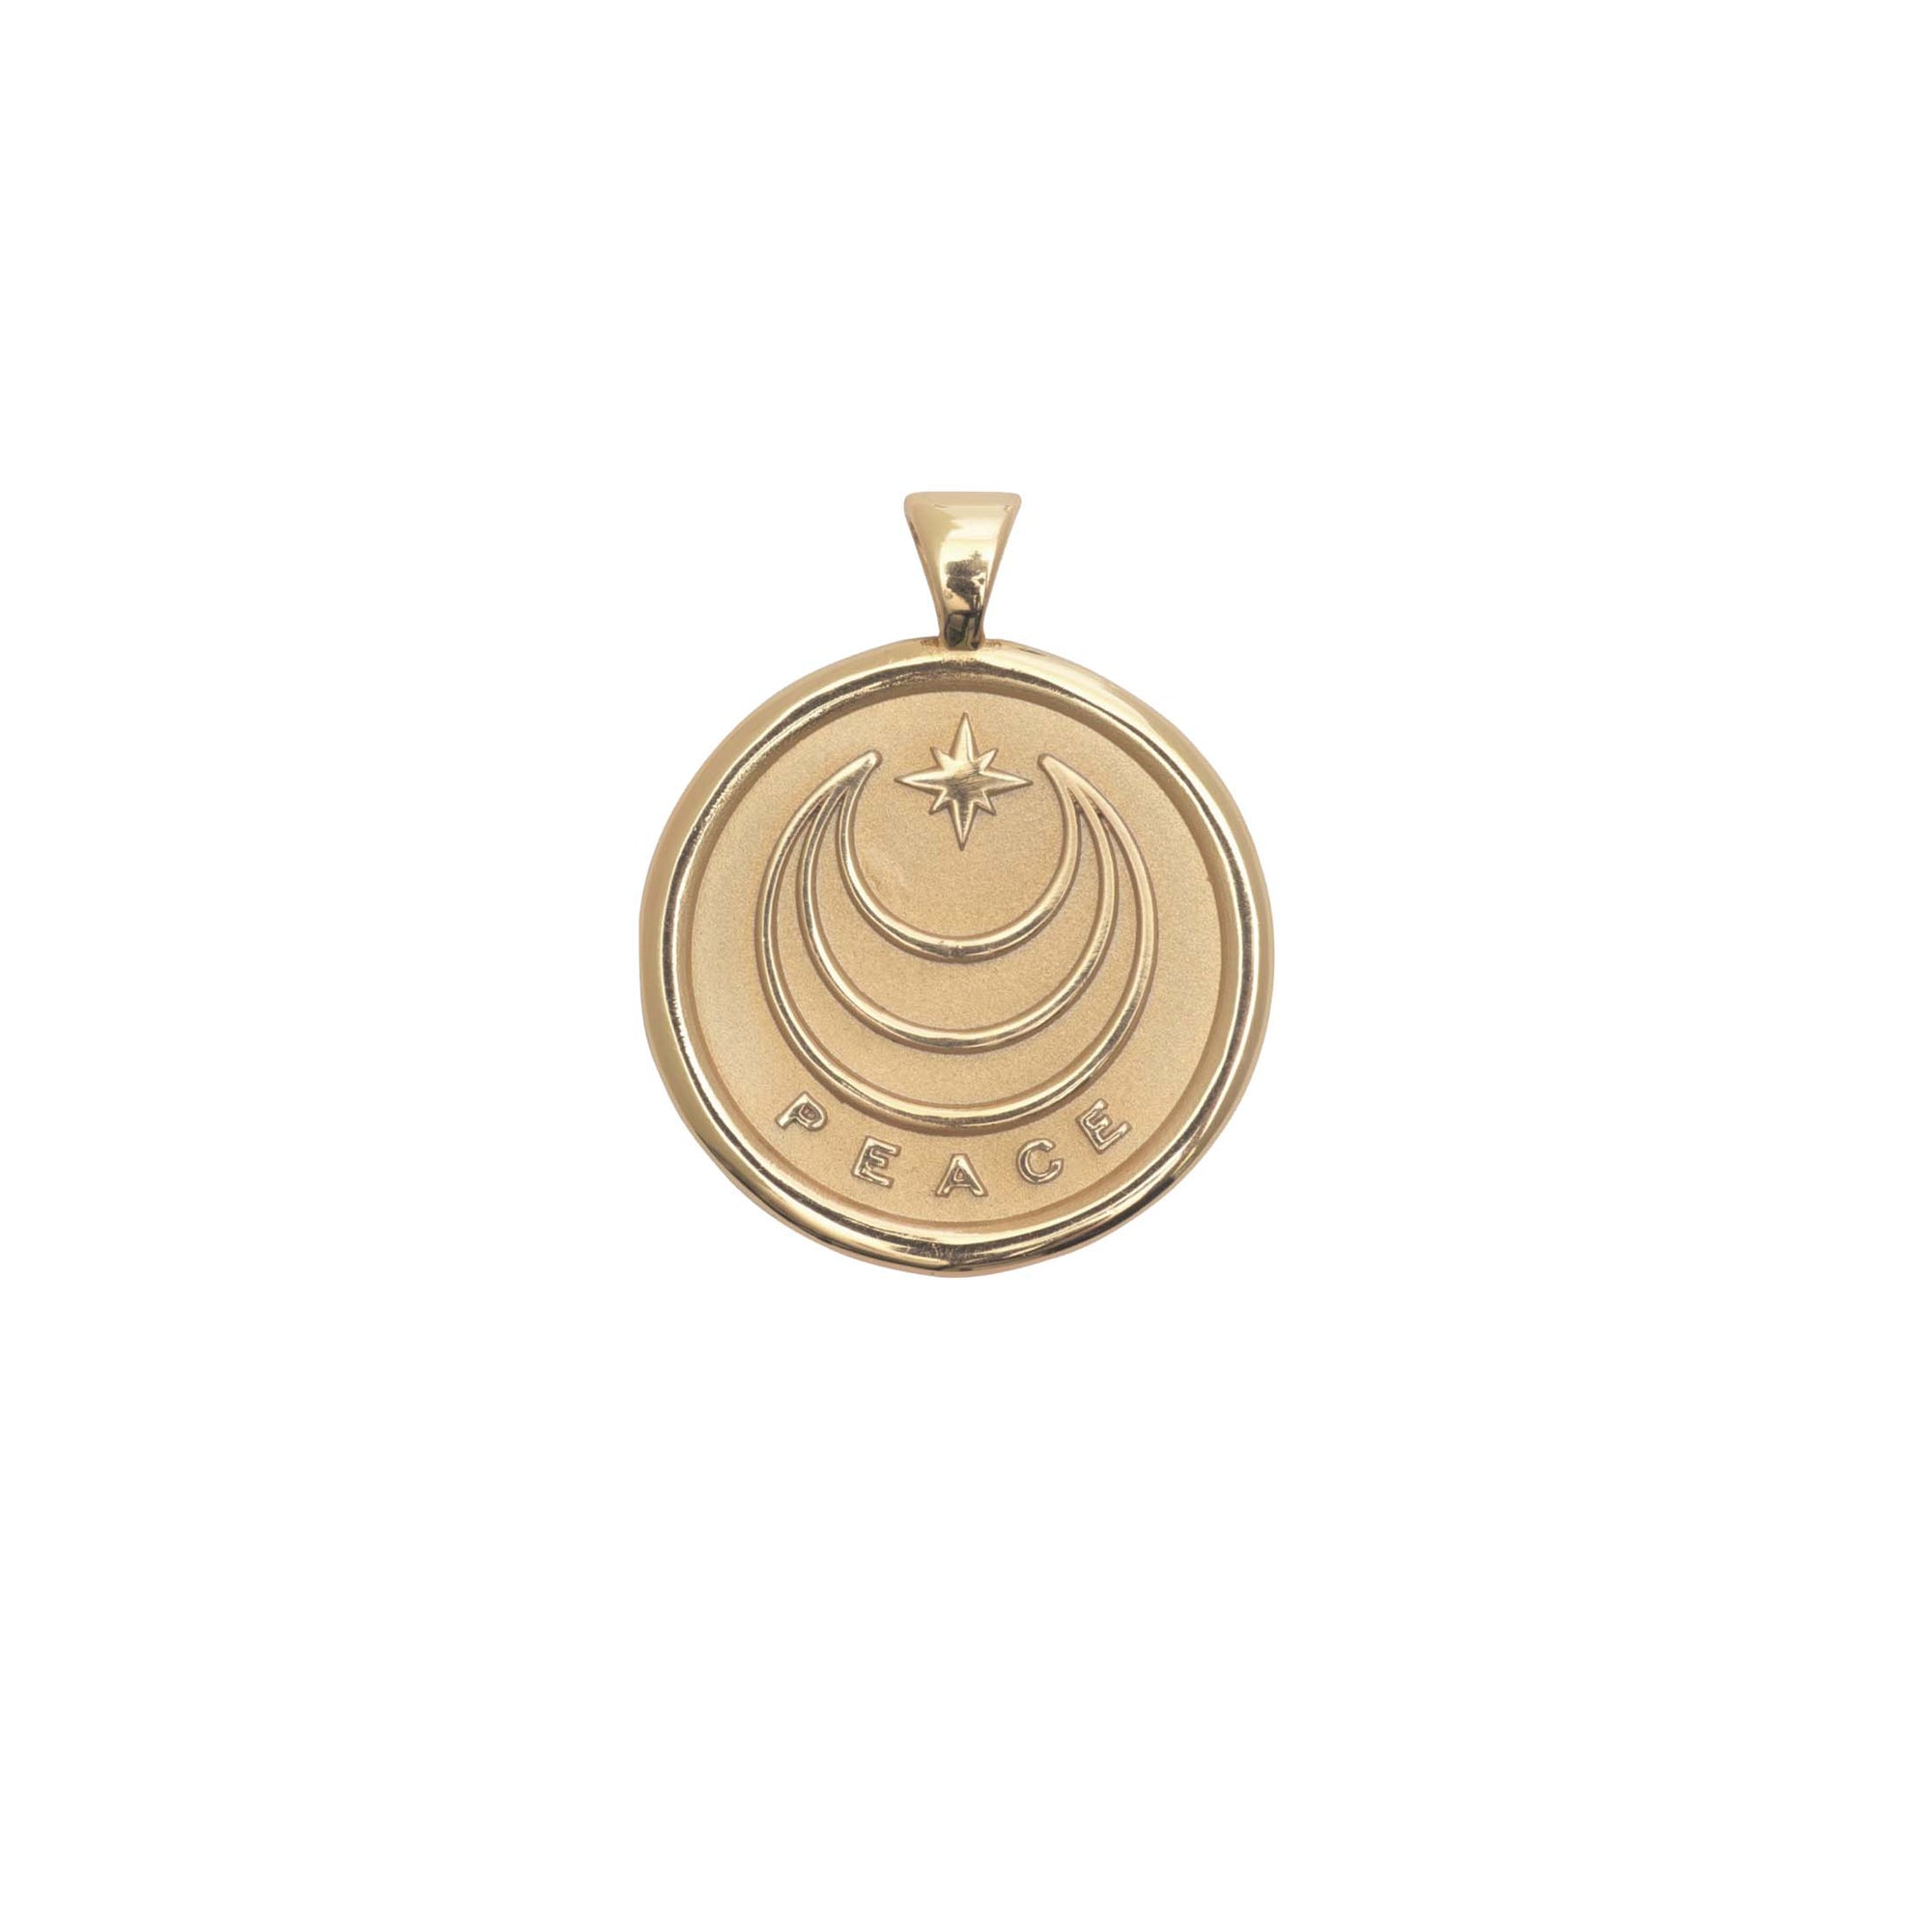 PEACE JW Small Pendant Coin in Solid Gold